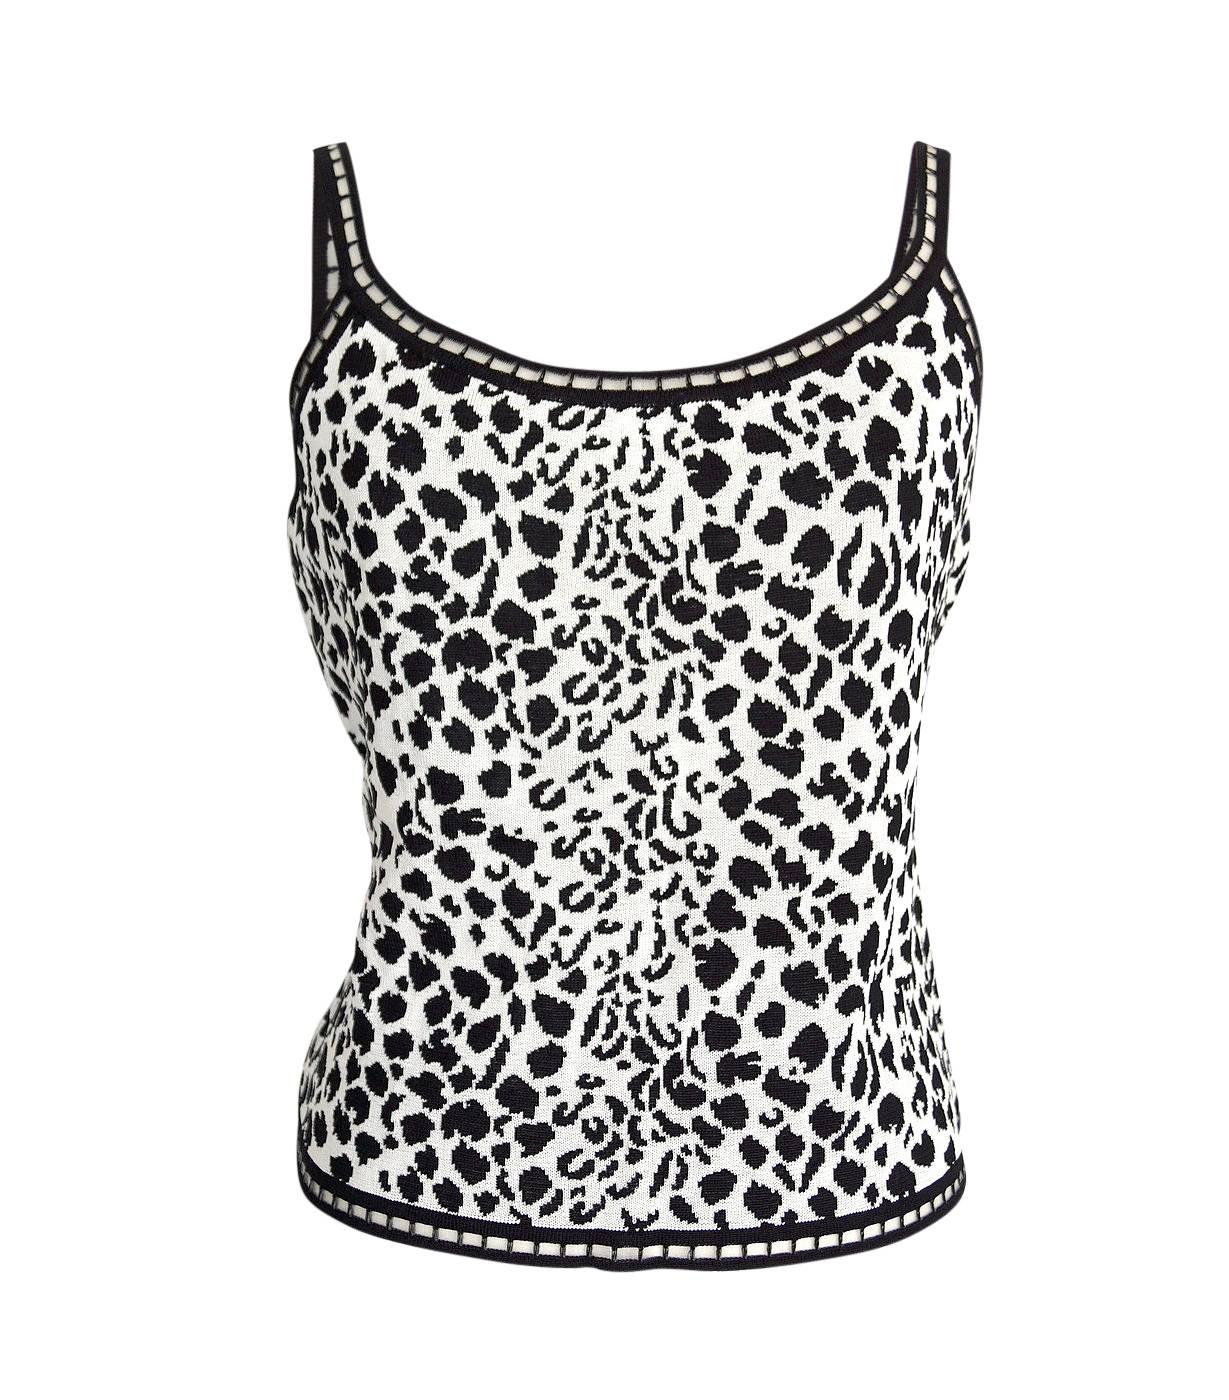 Women's Emanuel Ungaro Twinset Animal Print Black and White Lovely Buttons XL